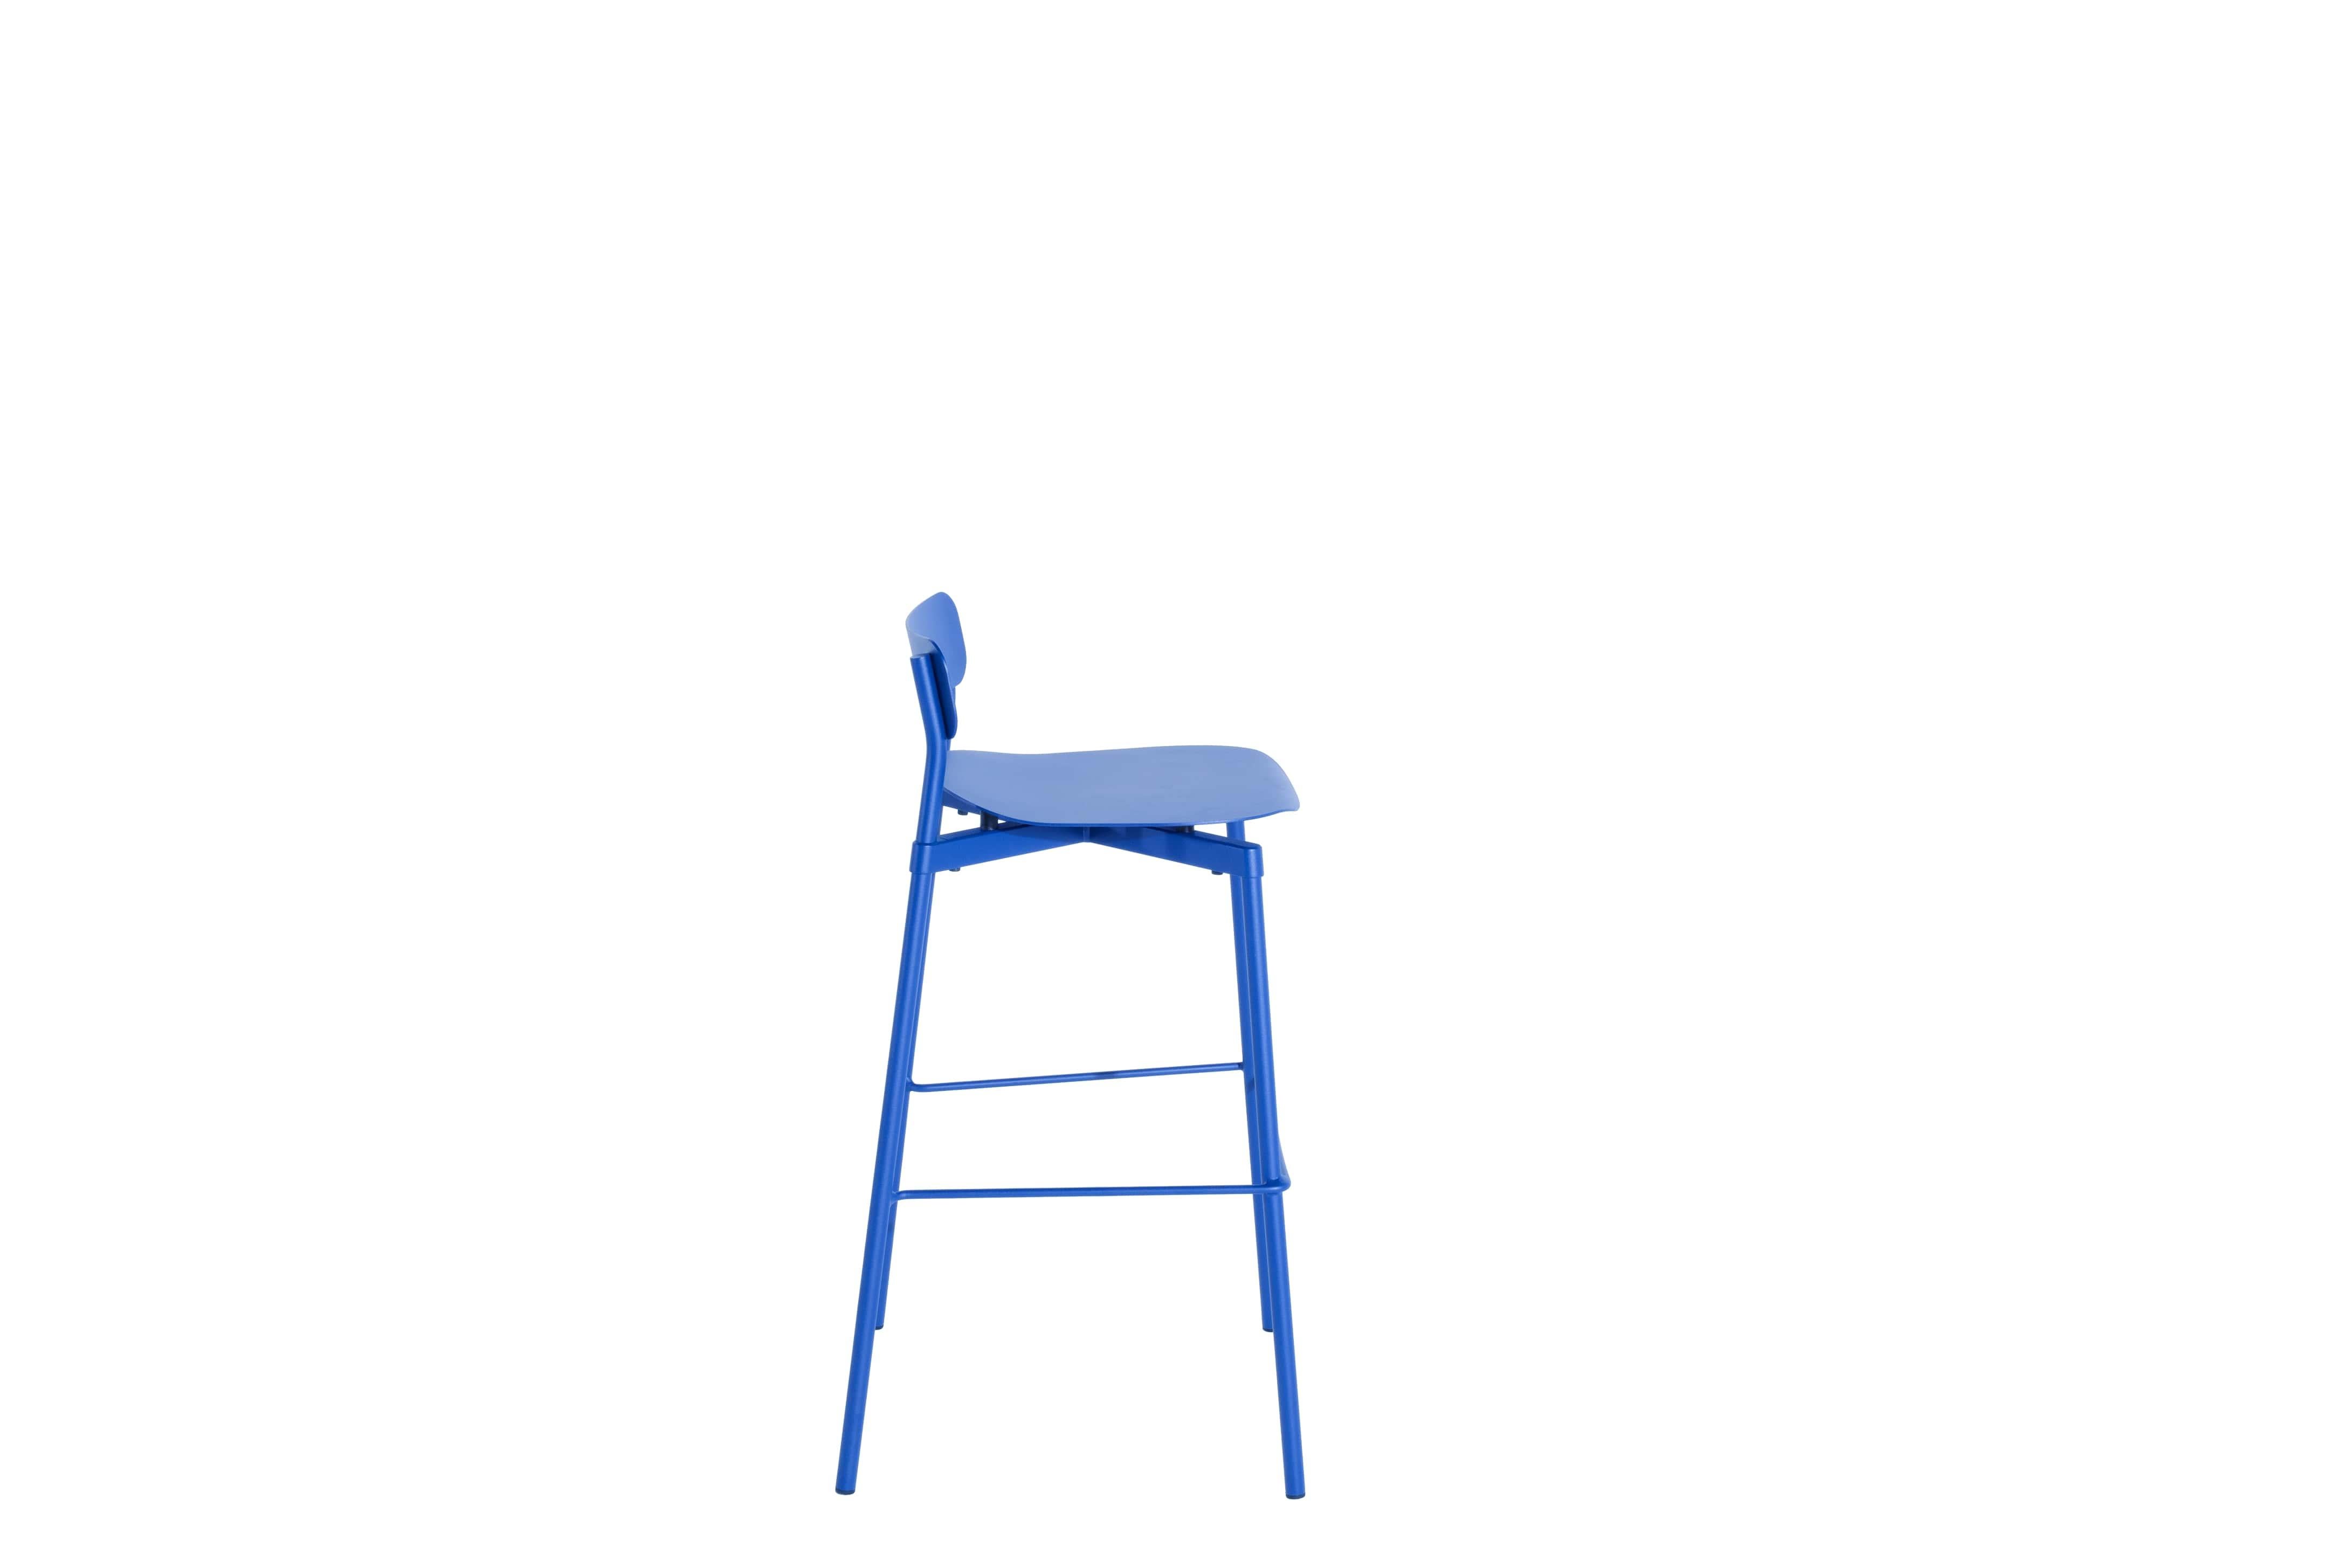 Petite Friture Large Fromme Bar stool in Blue Aluminium by Tom Chung, 2020

The Fromme collection stands out by its pure line and compact design. Absorbers placed under the seating gives a soft and very comfortable flexibility to seats. Made from